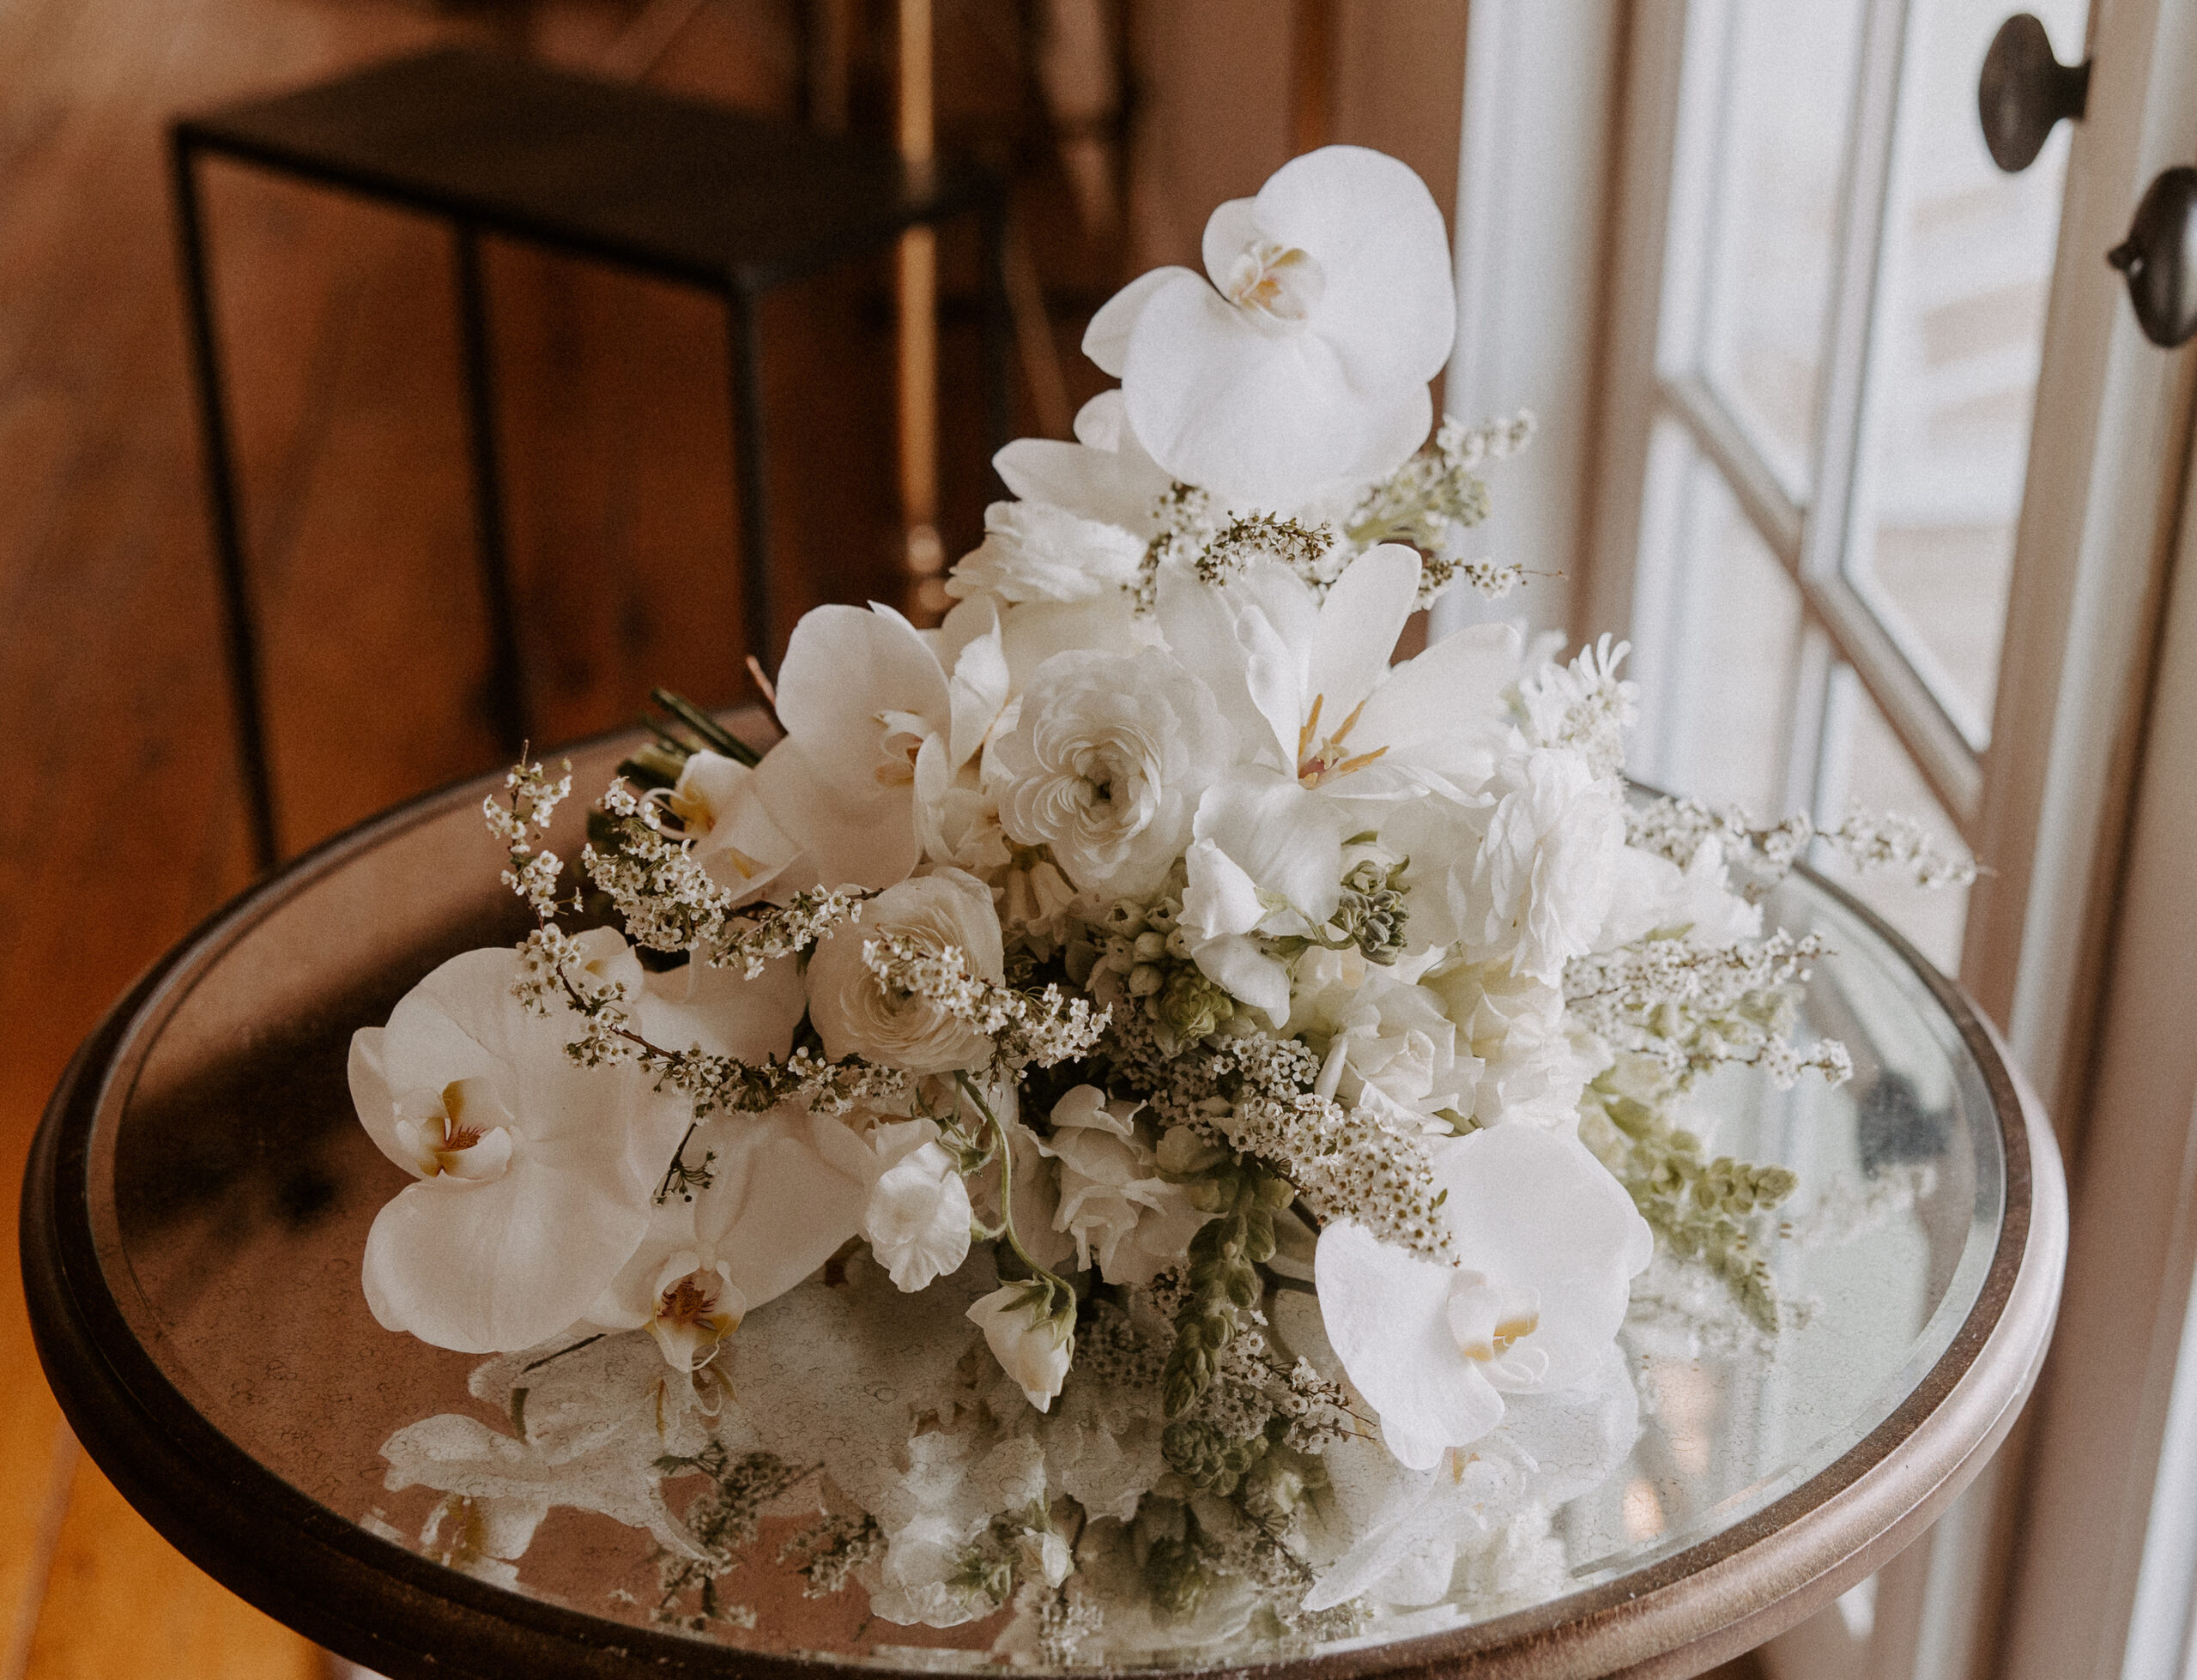 Wedding bouquet style trends that we're seeing at Mint Springs.